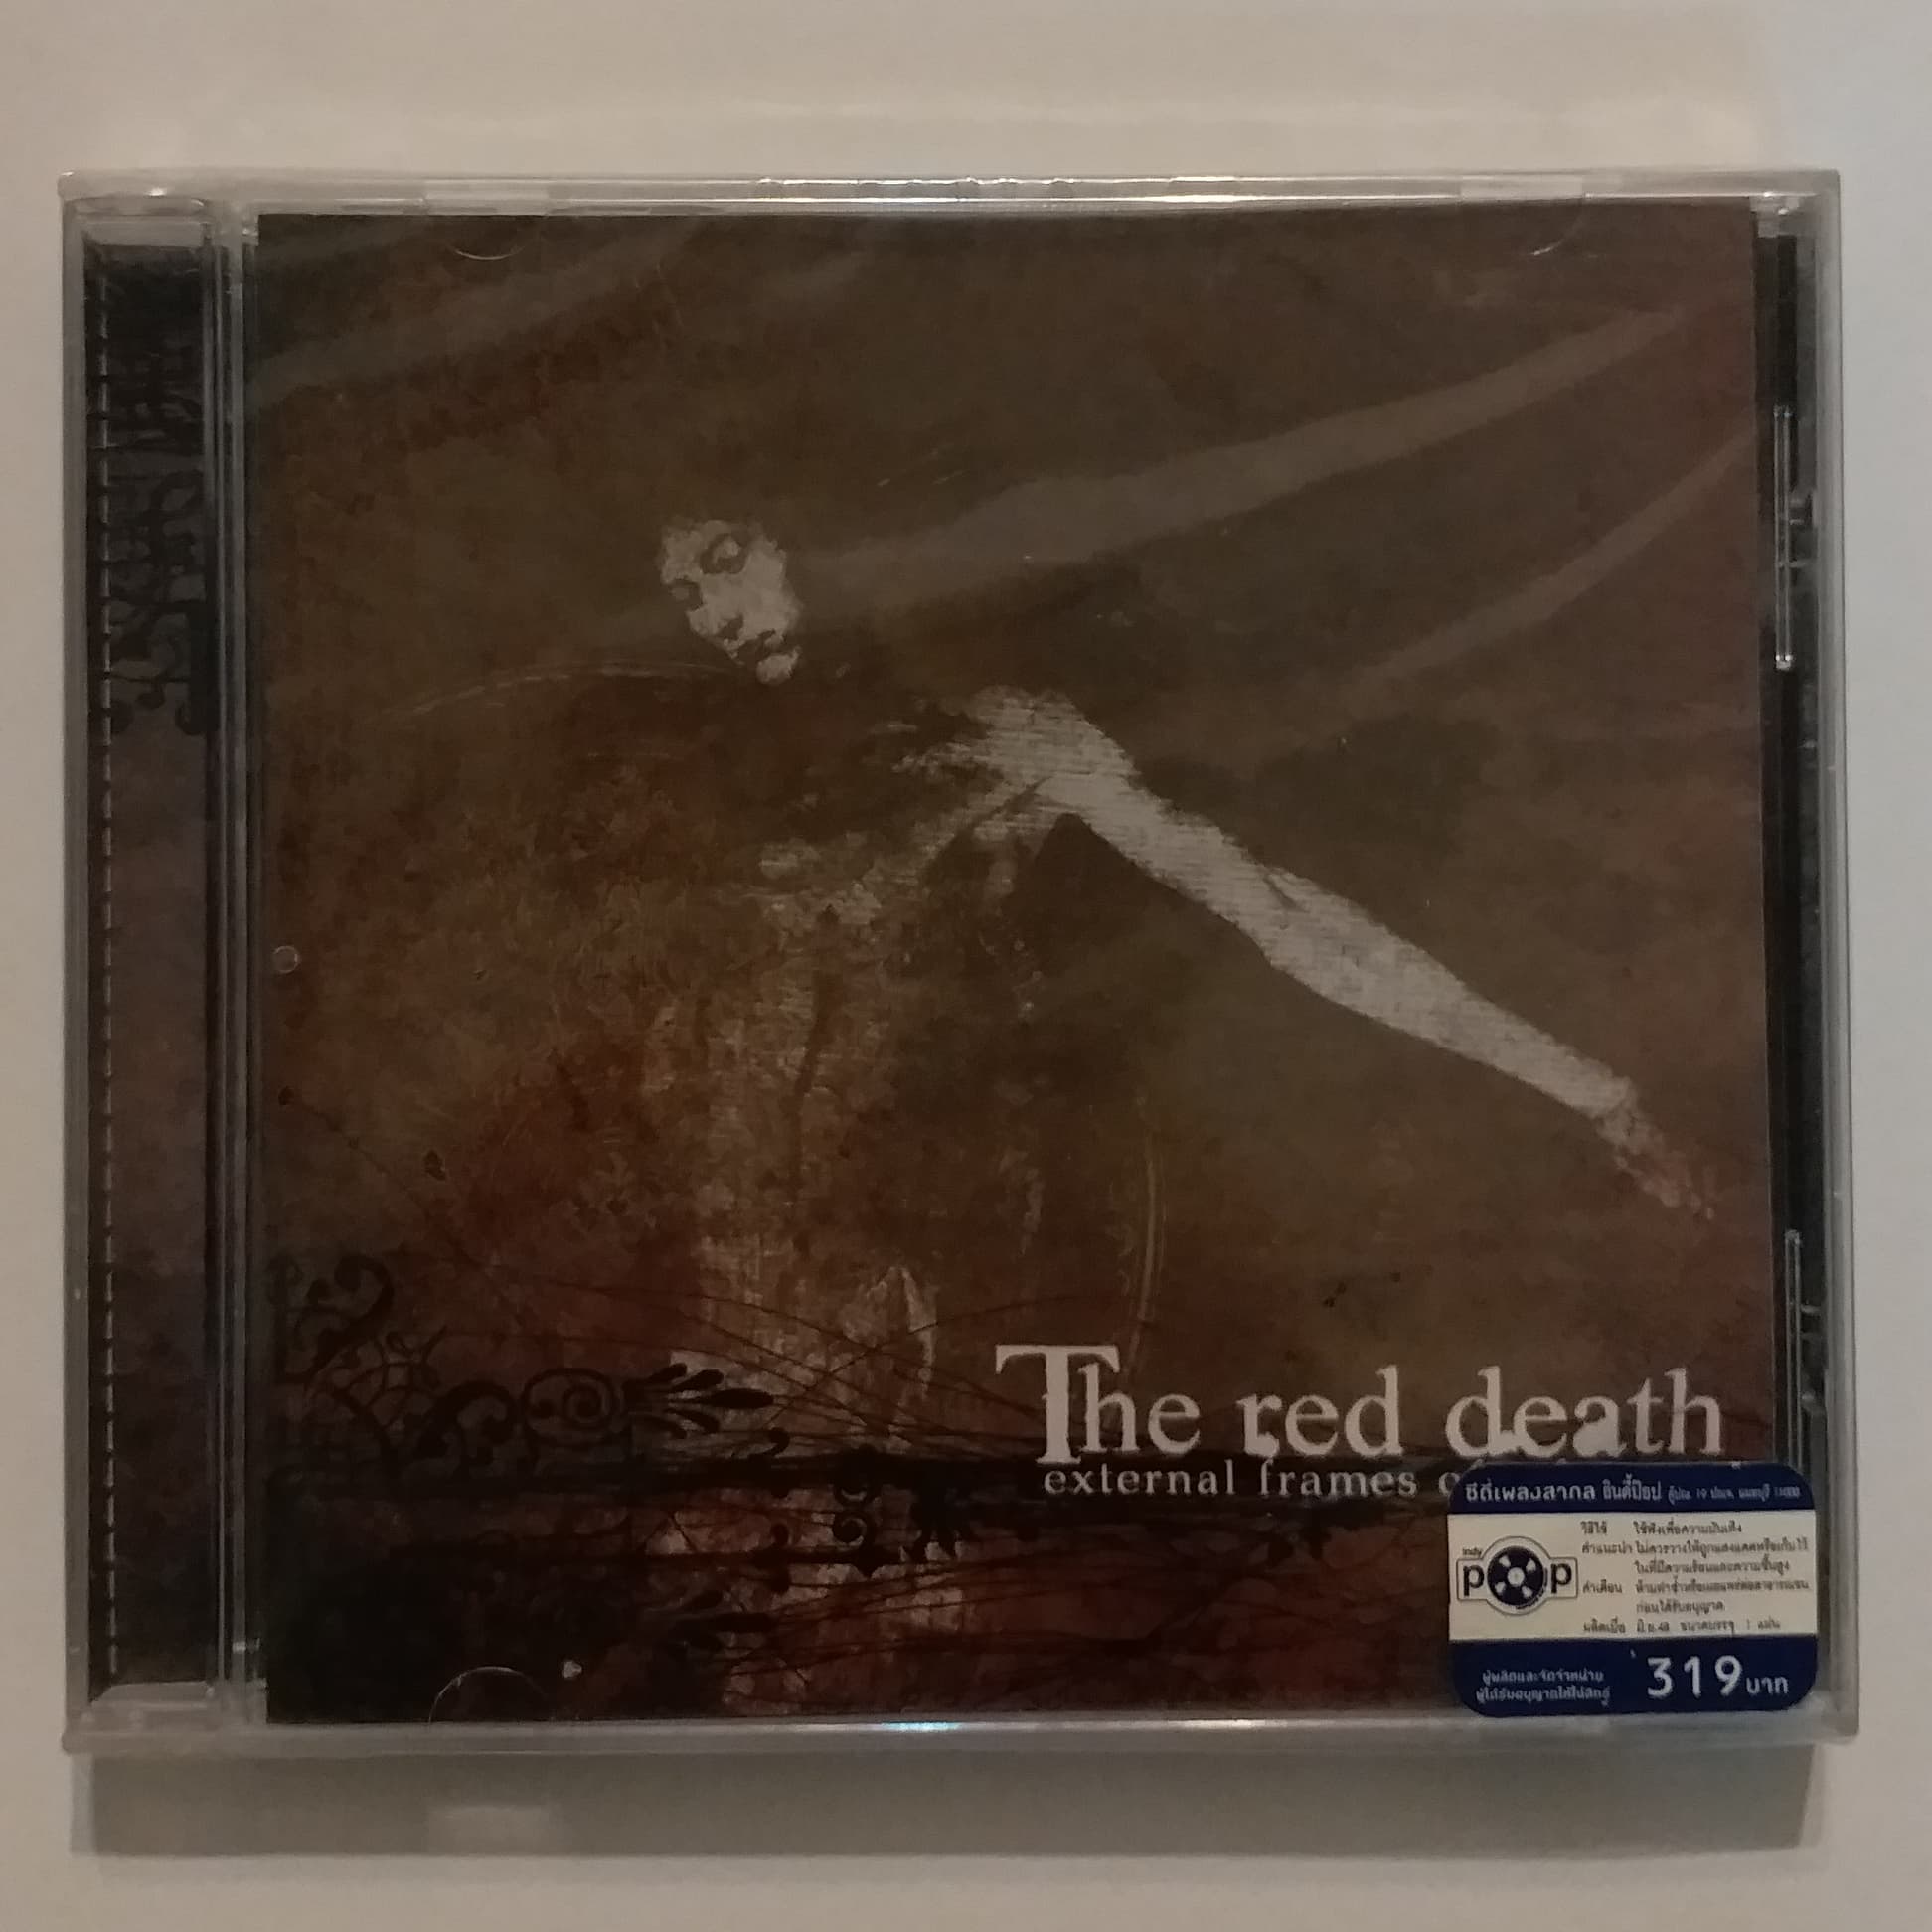 CD THE RED DEATH EXTERNAL FRAMES OF REFERENCE***สินค้ามือ1